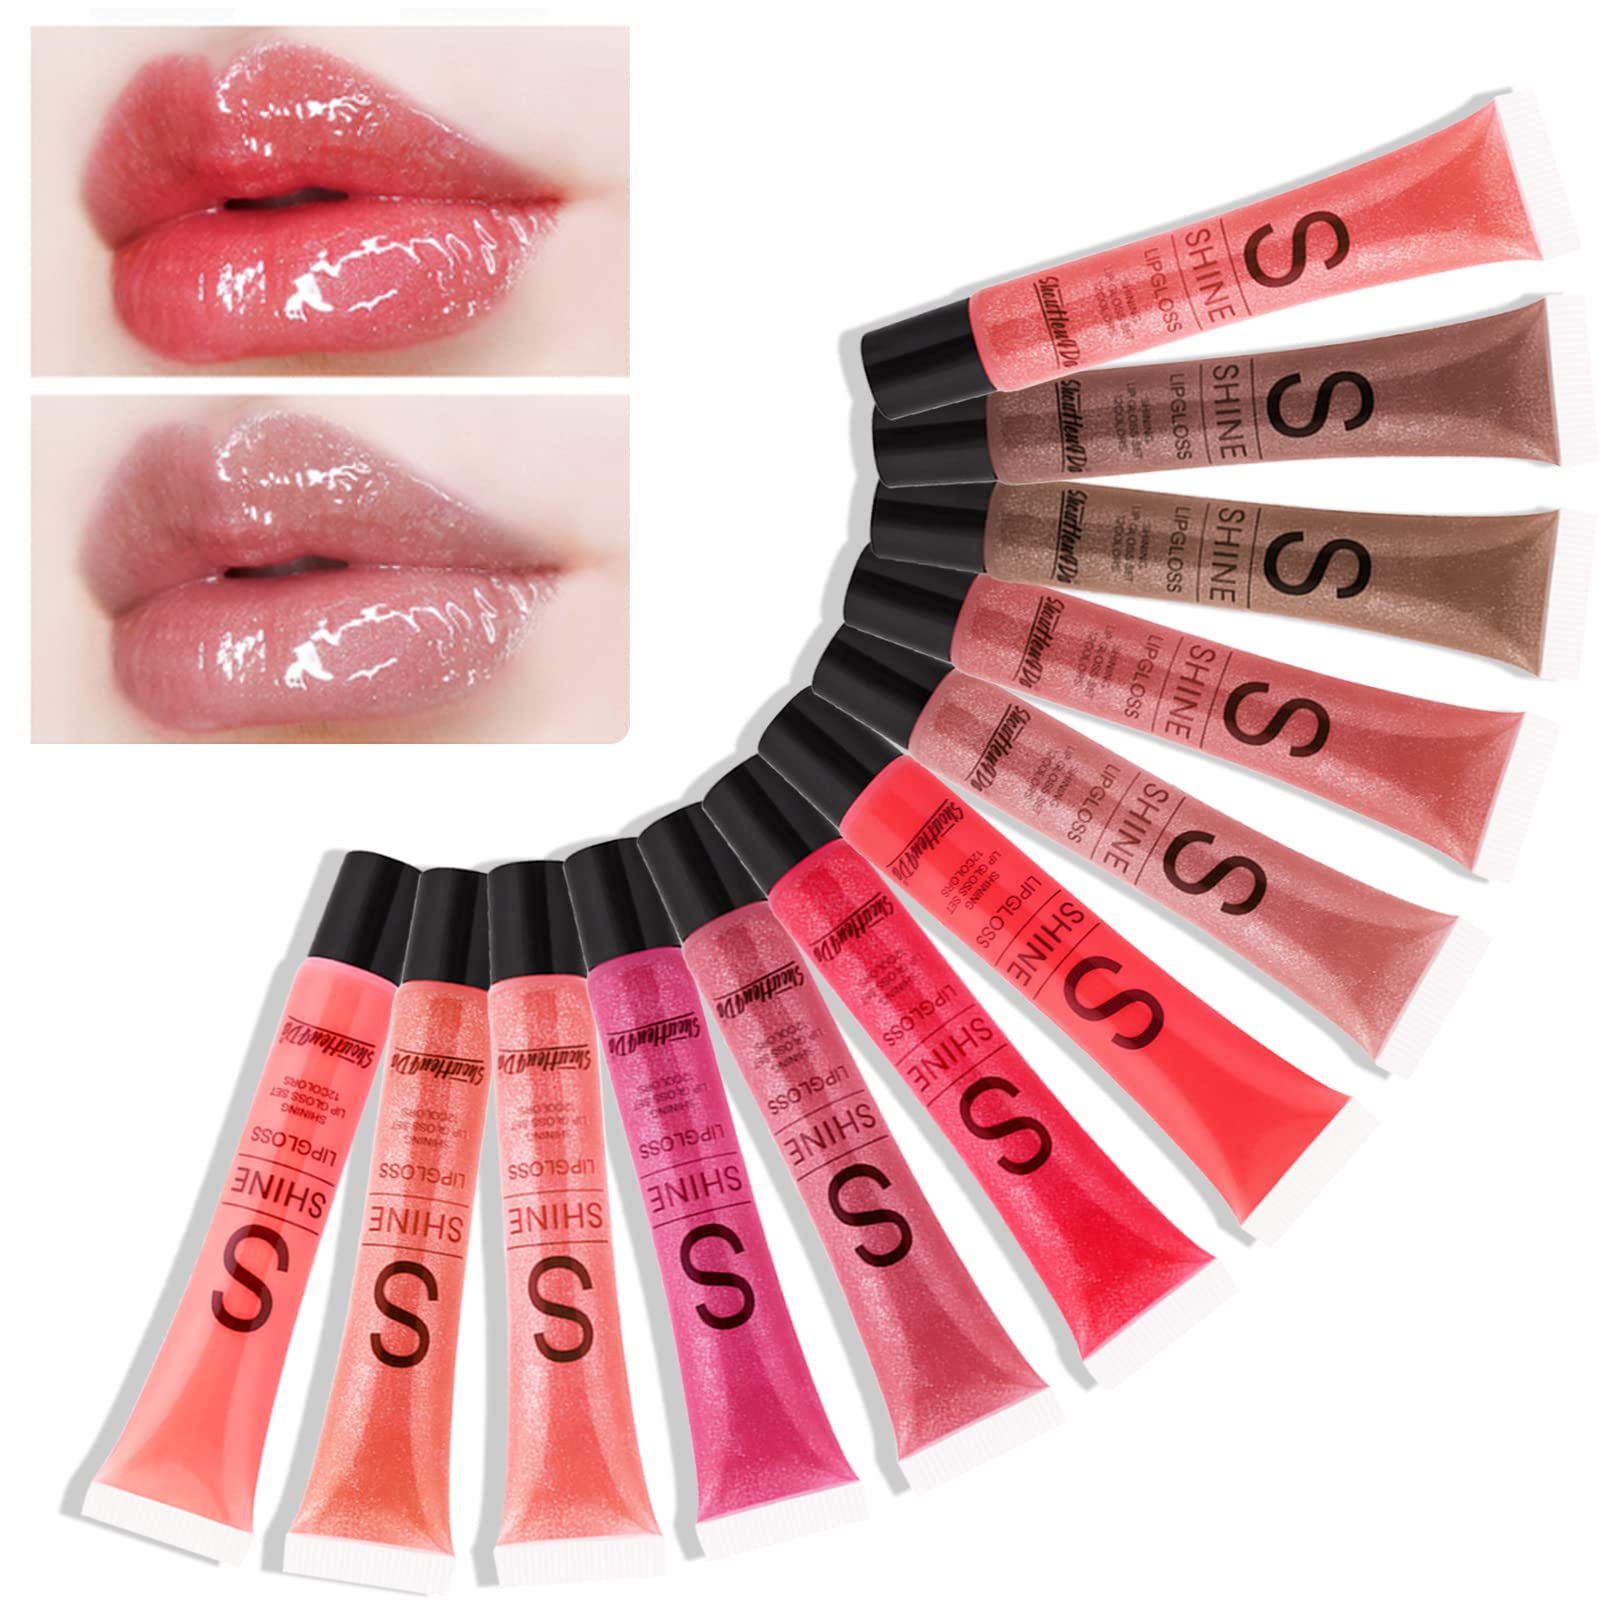 12 Color Lip Gloss Set,12Pc Shimmery Lipgloss Sets for Women and  Girls,Colorful Crystal Sparkling